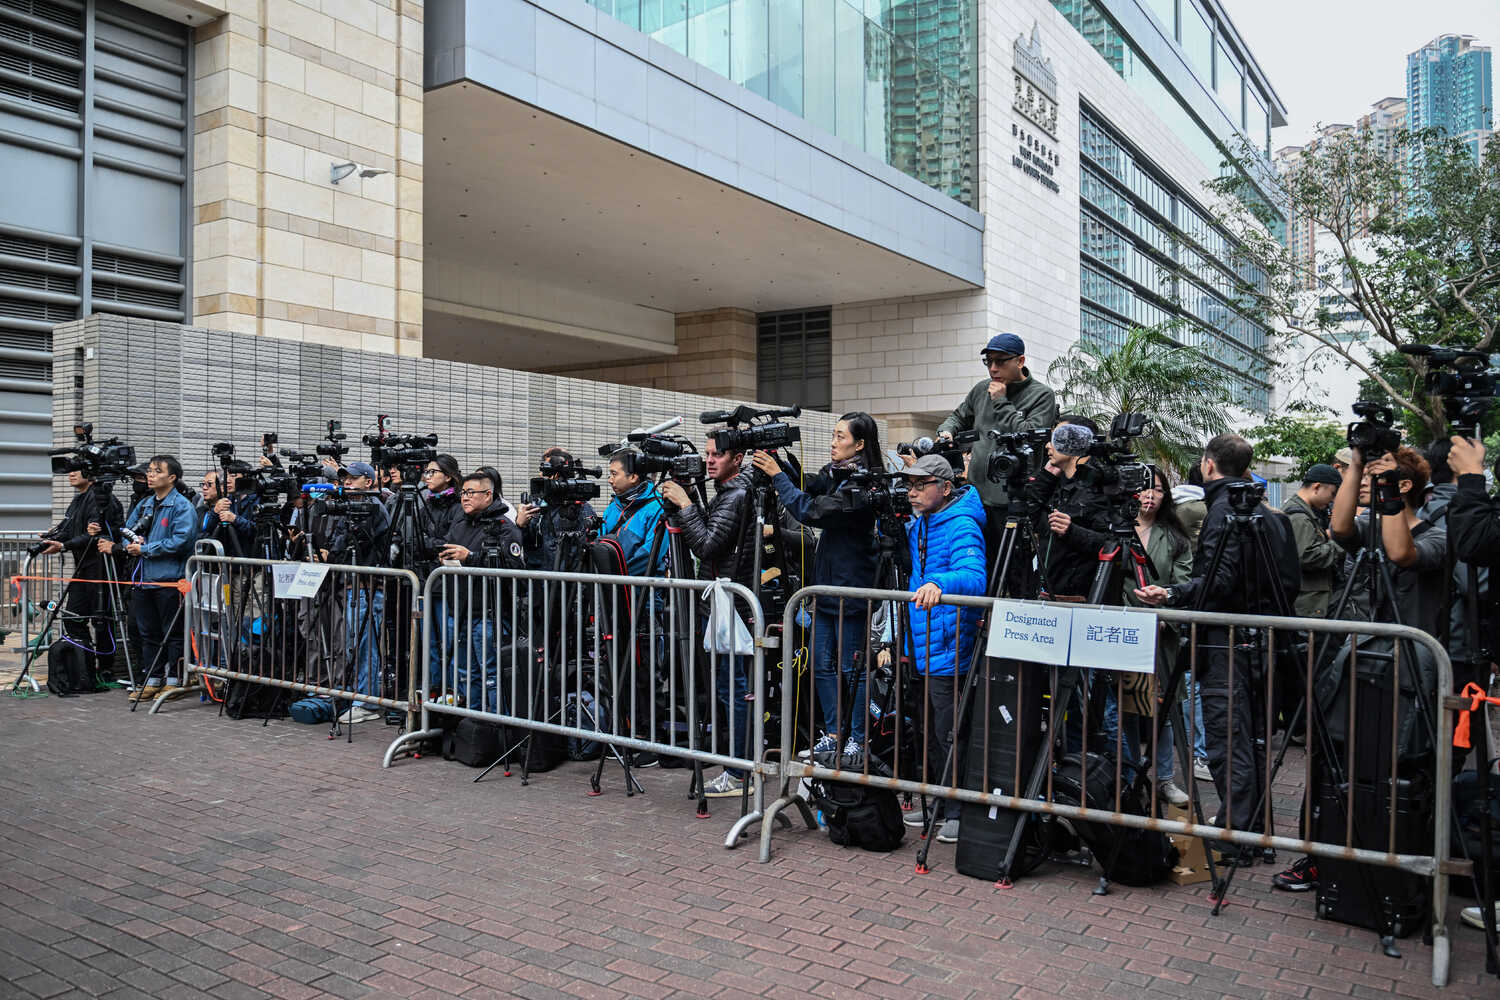 Journalists crowd together, their cameras pointed in the same direction, behind a fence set up outside a building.